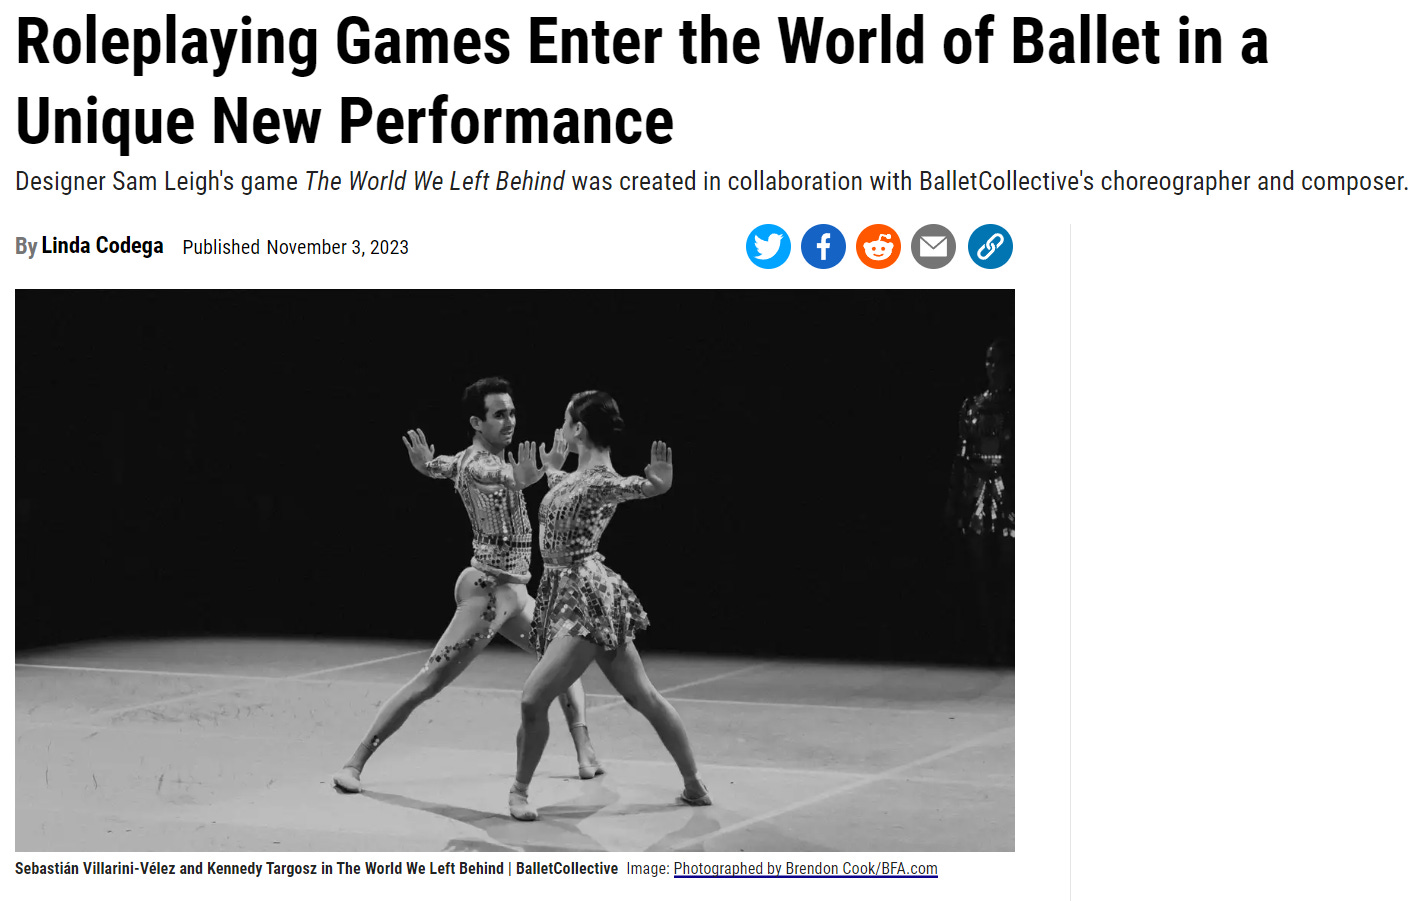 A screenshot of Linda Codega's article in Gizmodo. The title and subtitle read "Roleplaying Games Enter the World of Ballet in a Unique New Performance. Designer Sam Leigh's game The World We Left Behind was created in collaboration with BalletCollective's choreographer and composer."